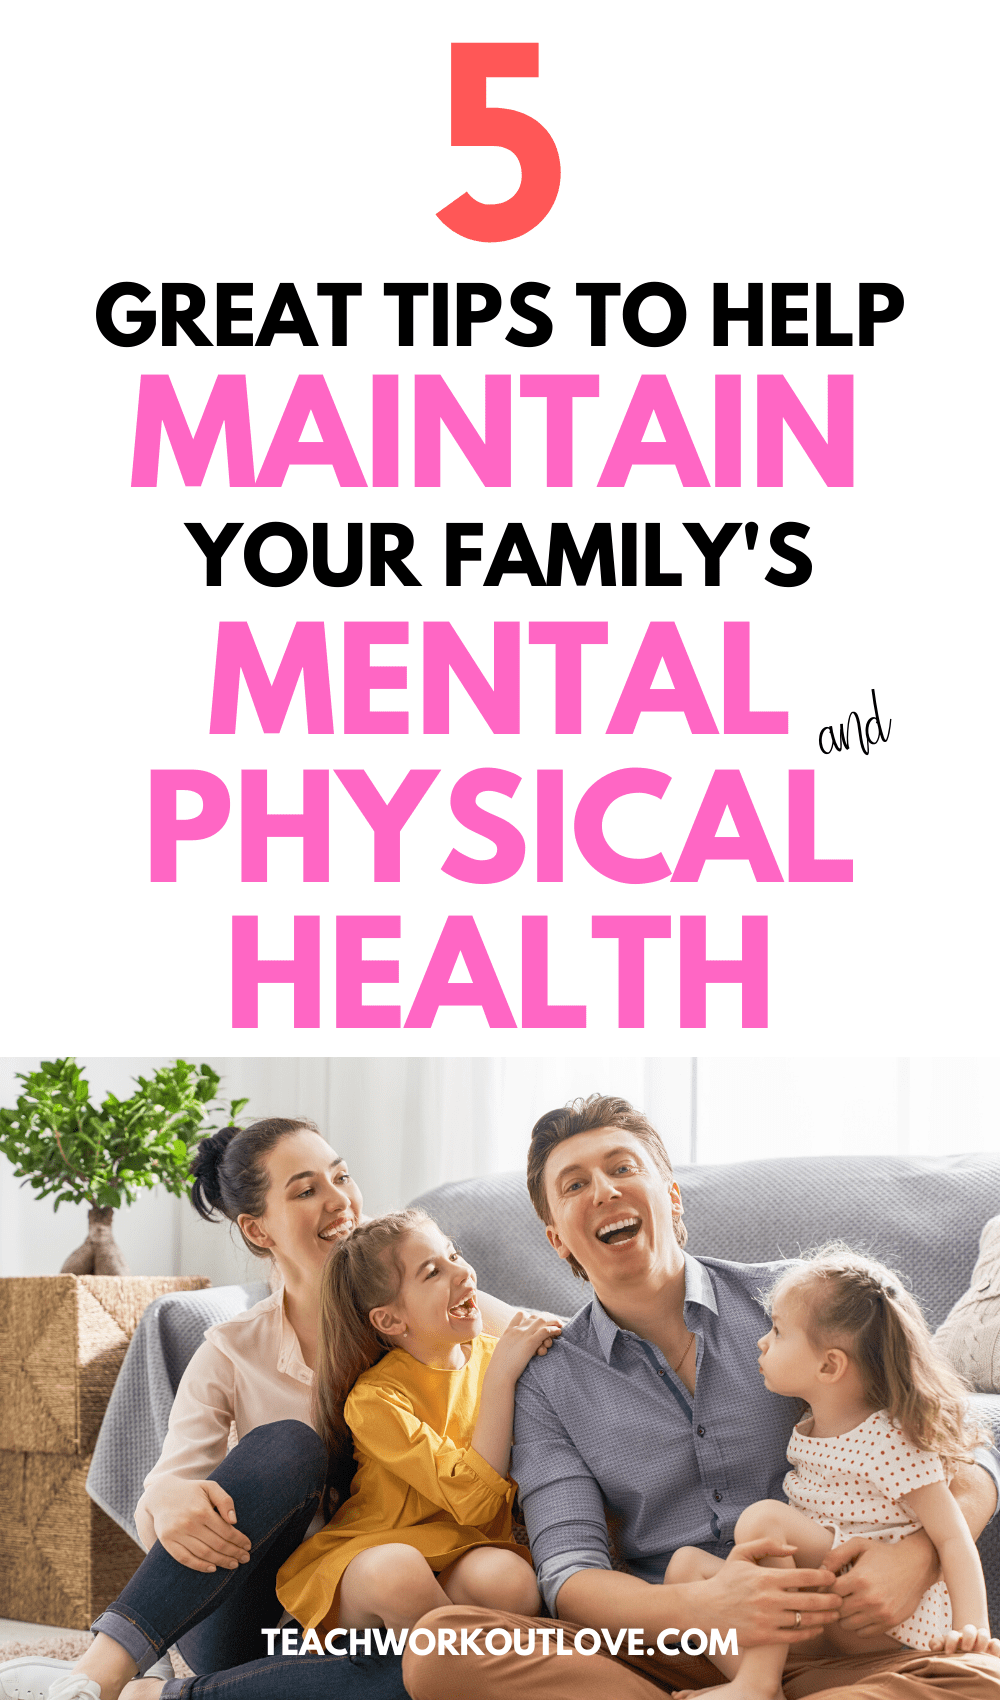 Mental & physical health are often treated as separate. Here's 5 tips to improving and maintaining mental and physical health for your family.